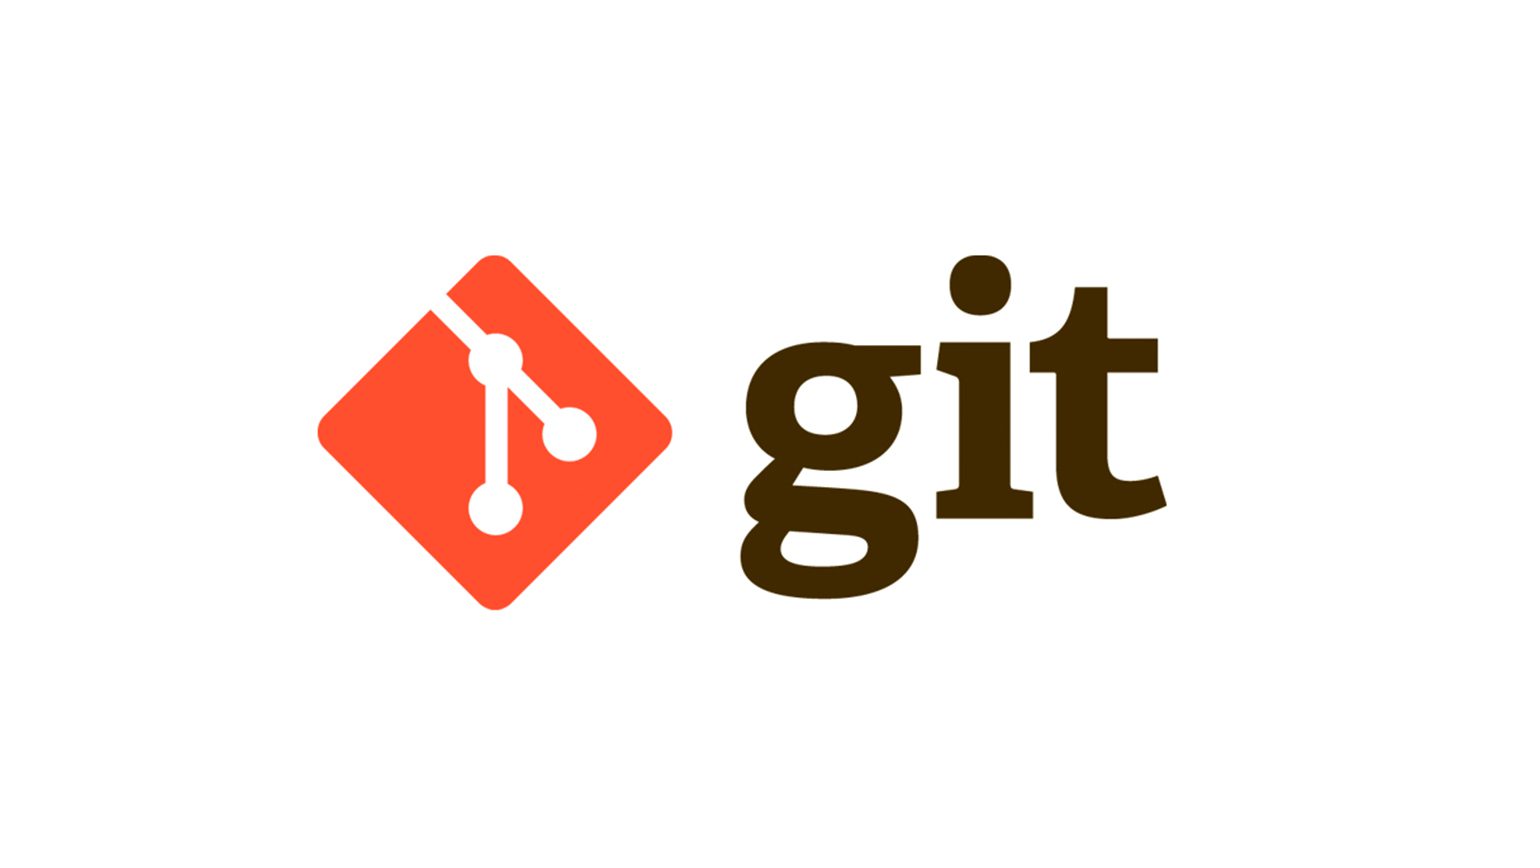 GIT- Cleaning up